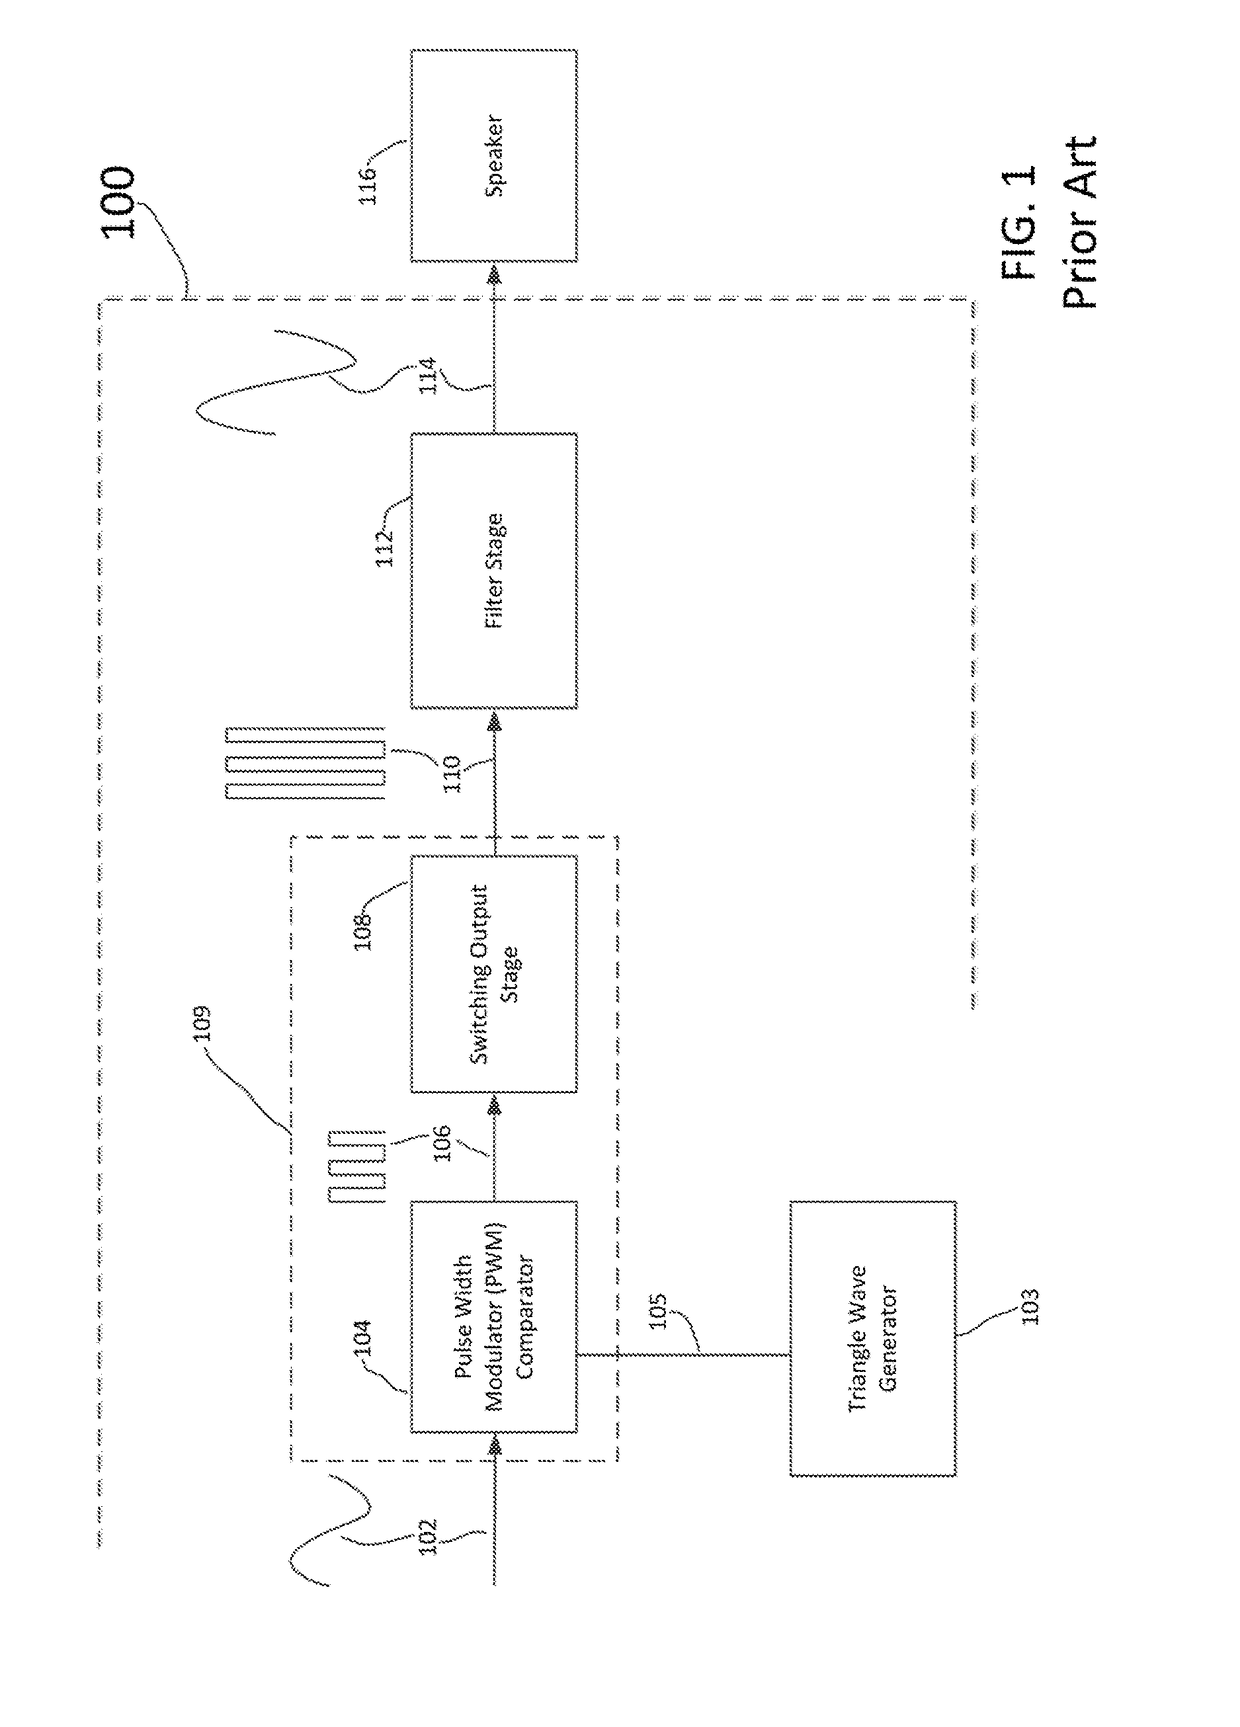 Average current-mode feedback control of multi-channel class-D audio amplifier